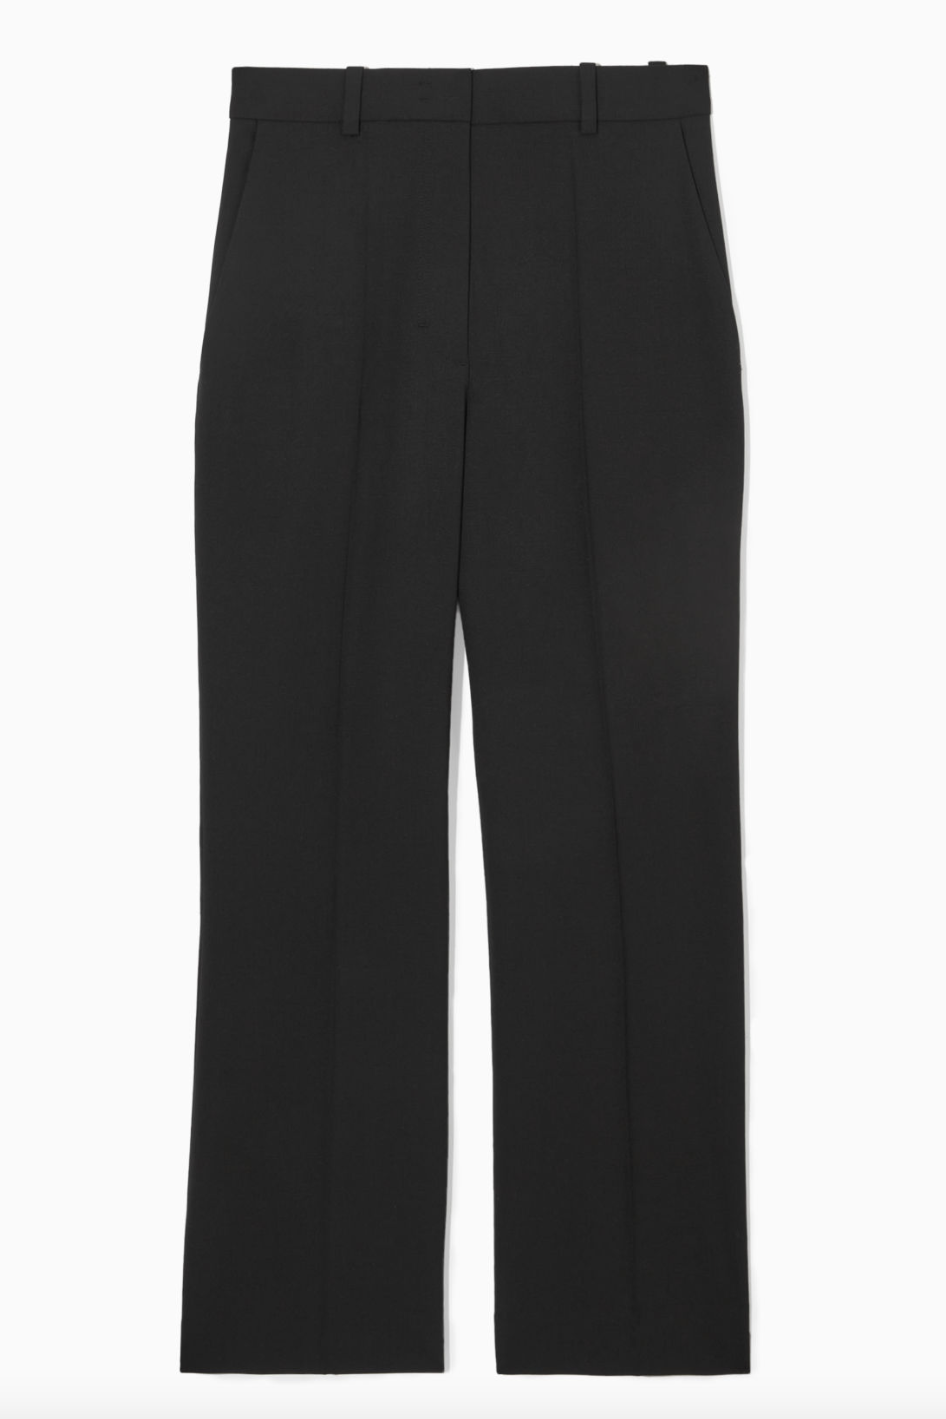 Relaxed Flare Wool Pants - Black